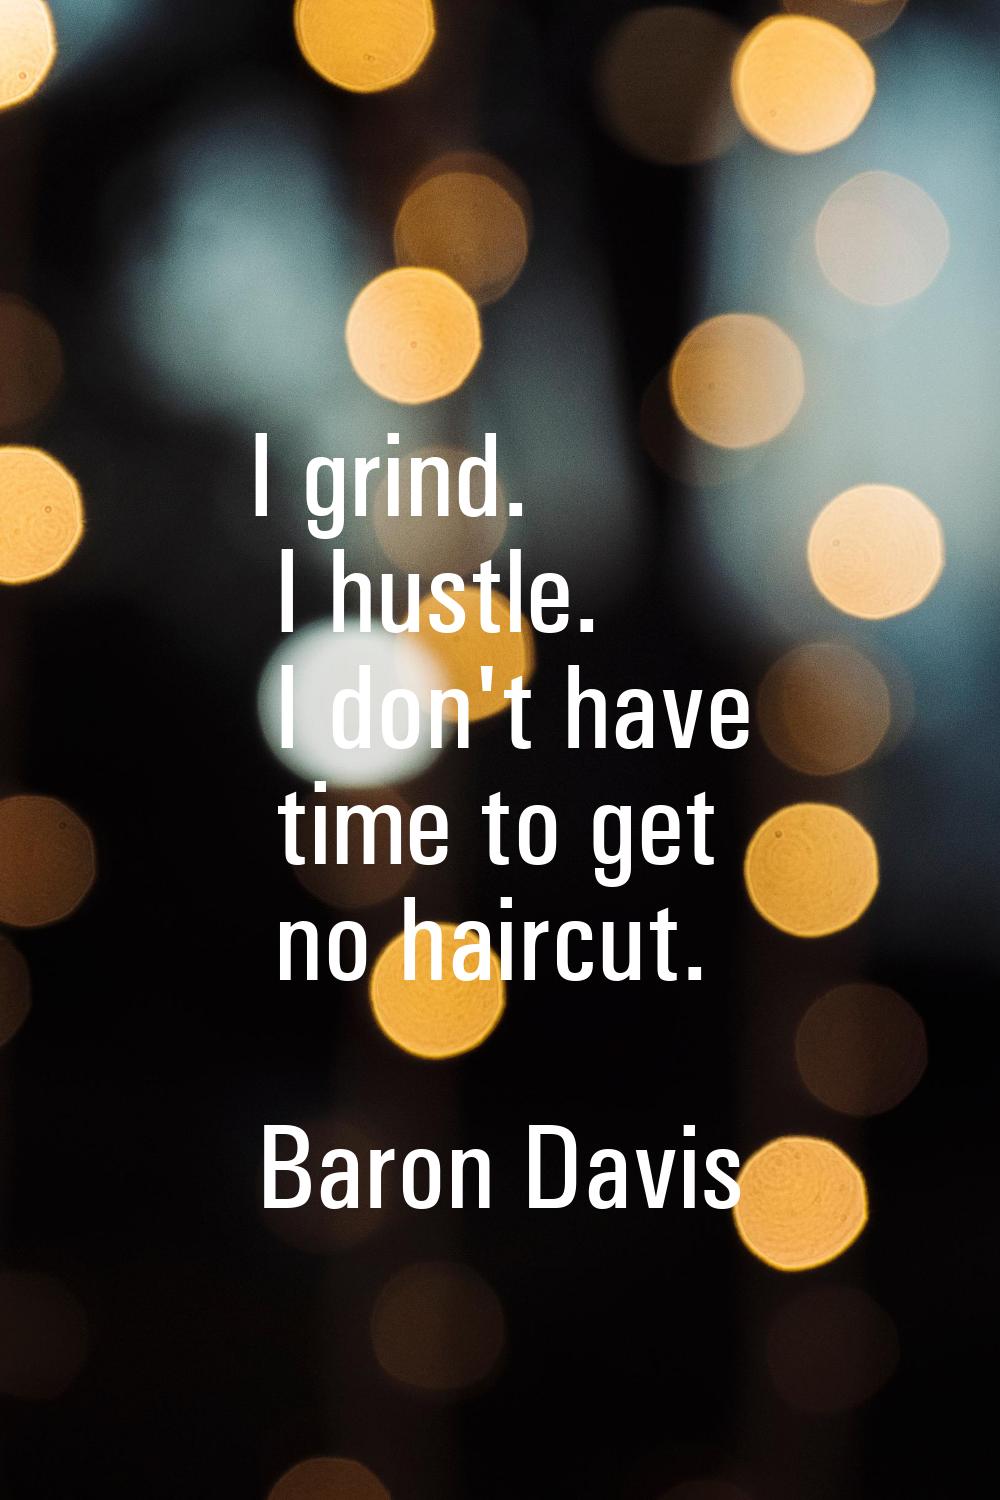 I grind. I hustle. I don't have time to get no haircut.